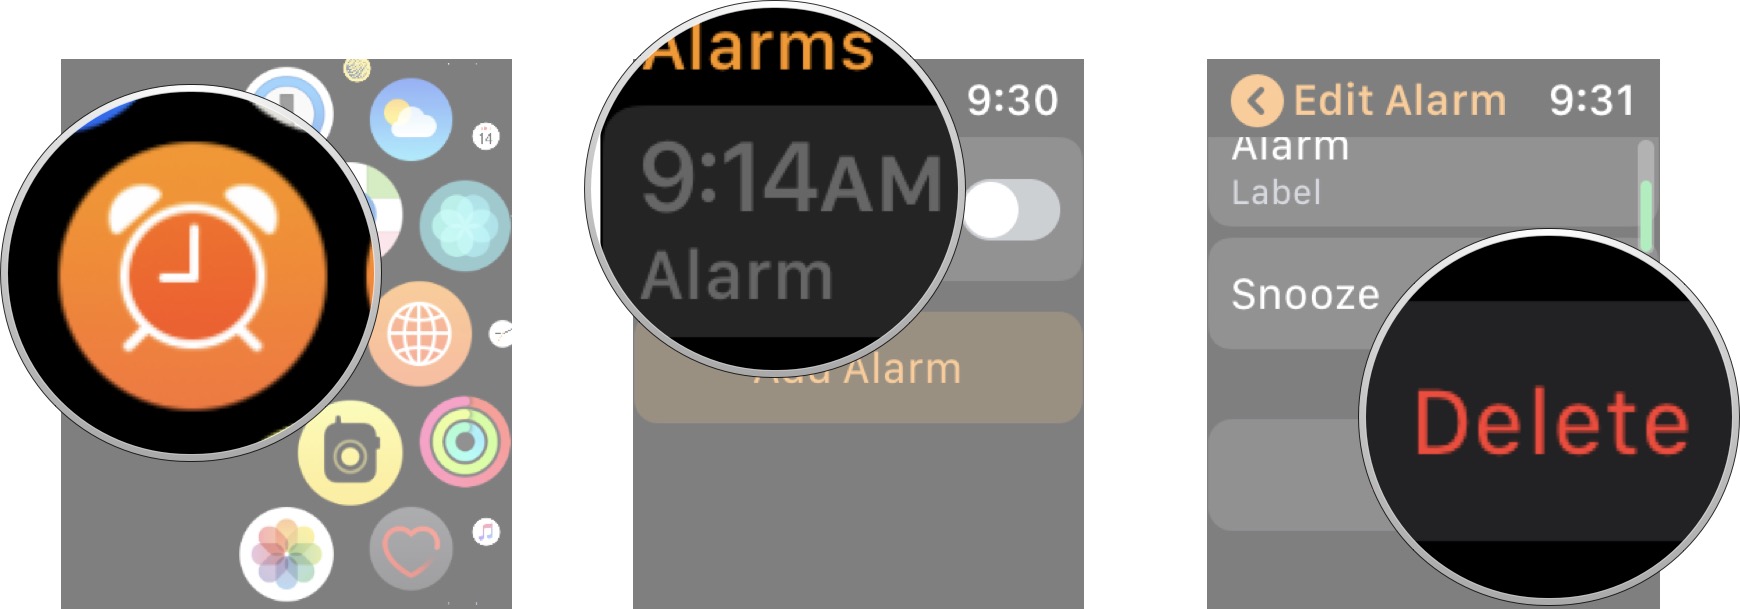 Launch alarms app on Apple Watch, tap the alarm you want to delete, and then tap delete.